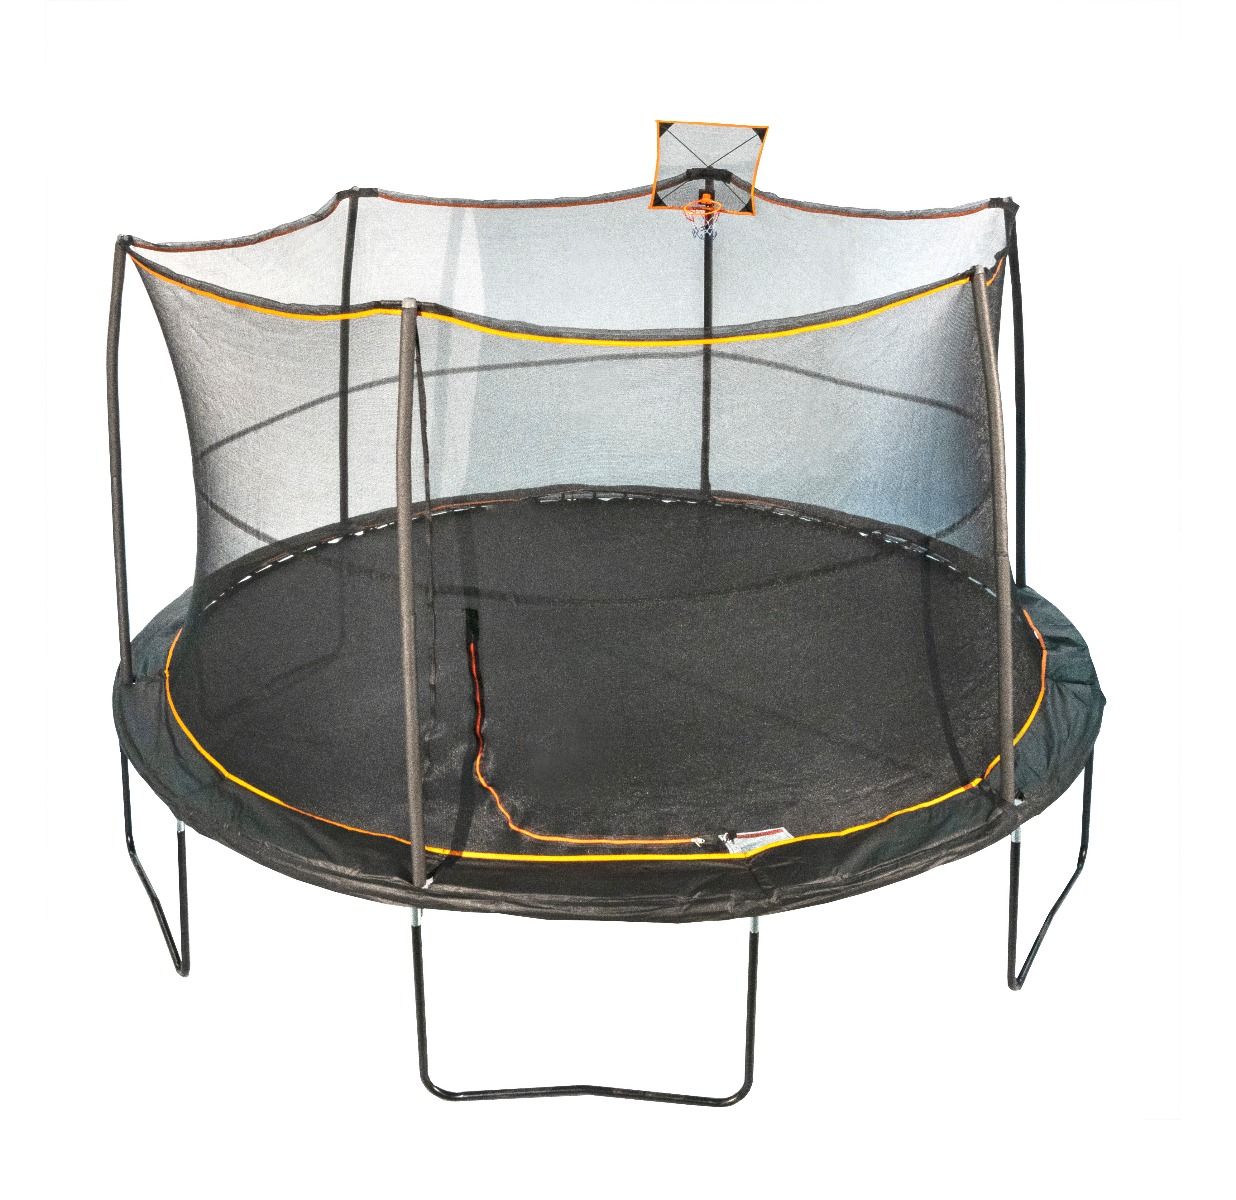 Jumpking 14' Round Combo with Powder Coated Legs & Mesh Hoop Model JK146PAPCFH